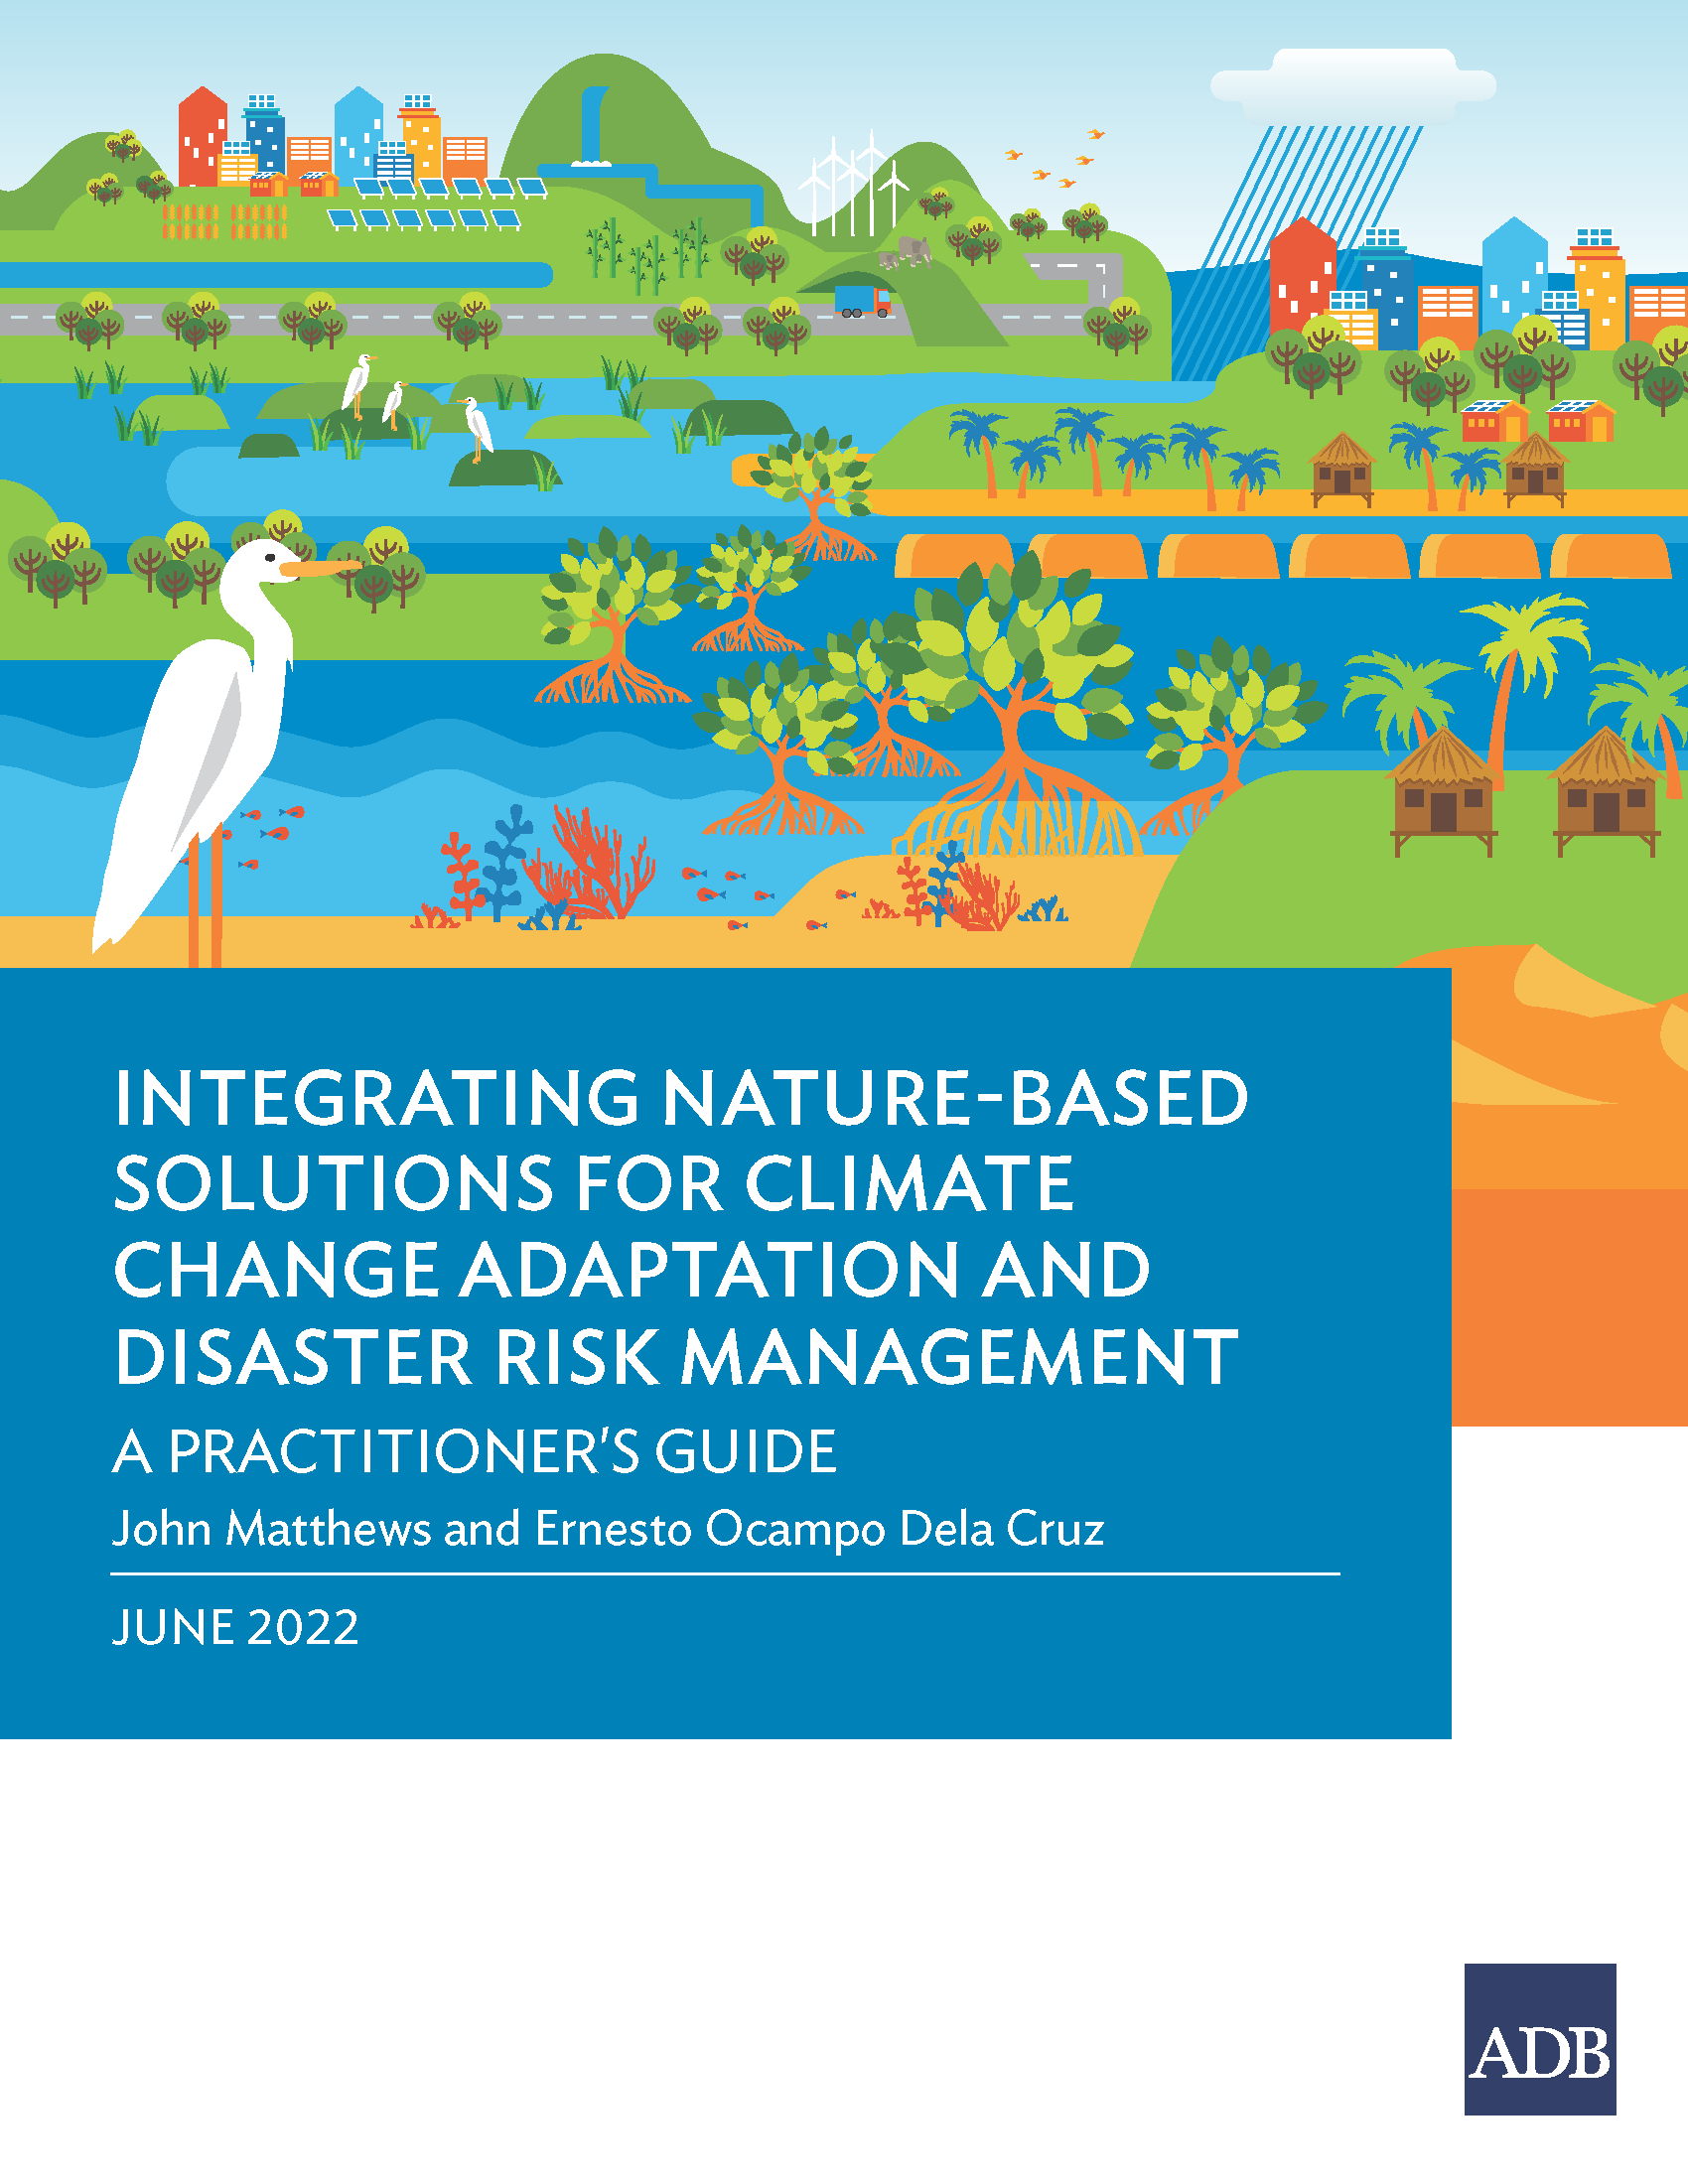 Cover page for Integrating Nature-Based Solutions for Climate Change Adaptation and Disaster Risk Management: A Practitioner’s Guide